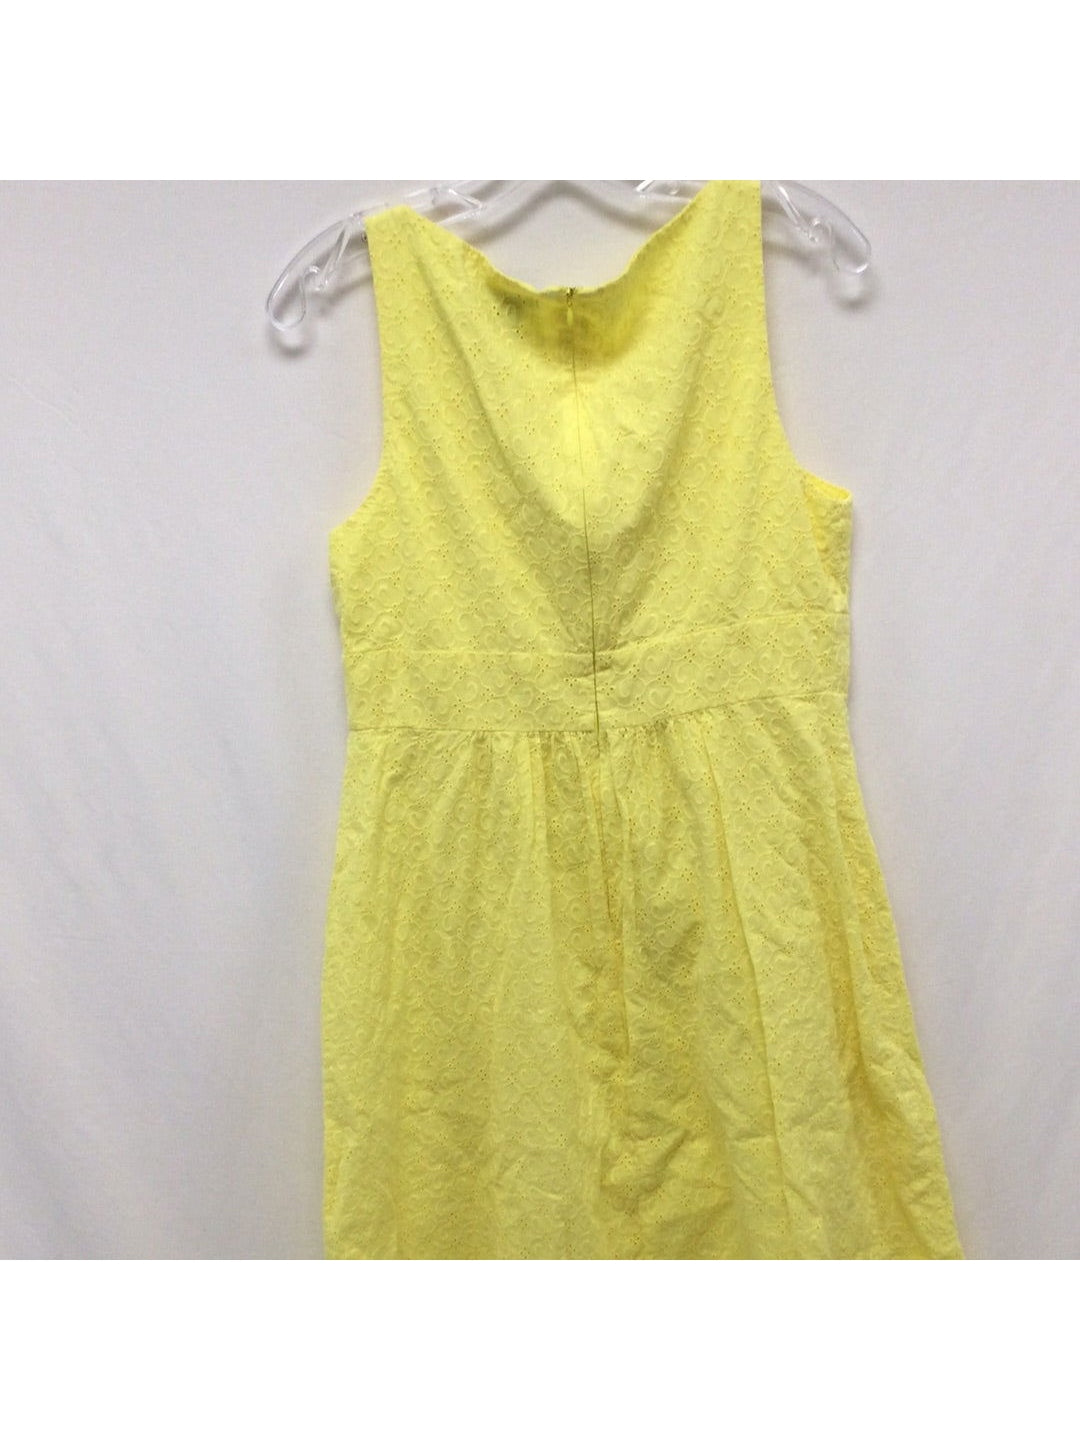 Chaps Ladies Yellow Size 14 Sleeve Less Dress - The Kennedy Collective Thrift - 